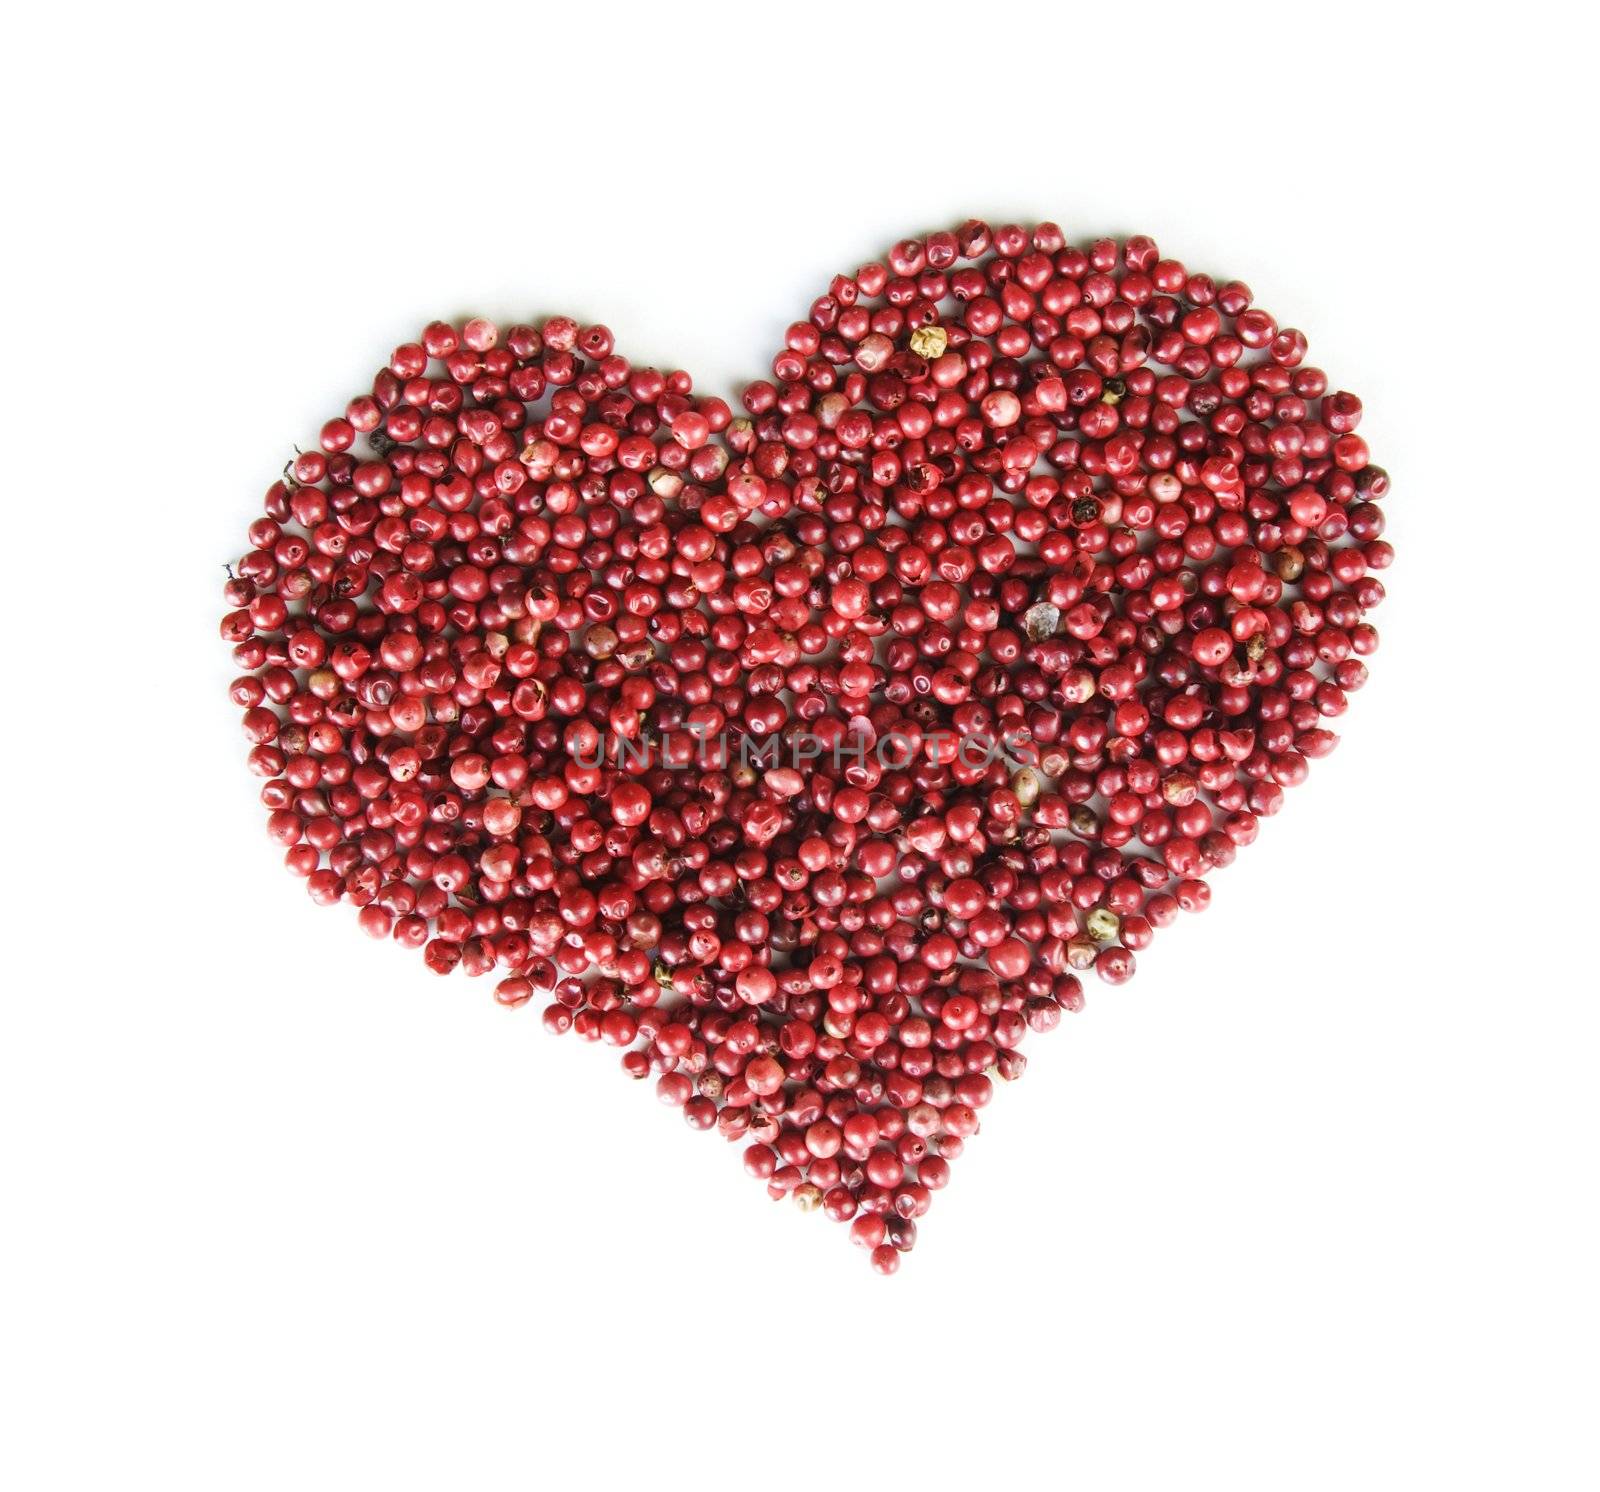 Red Pepper Heart by Creatista